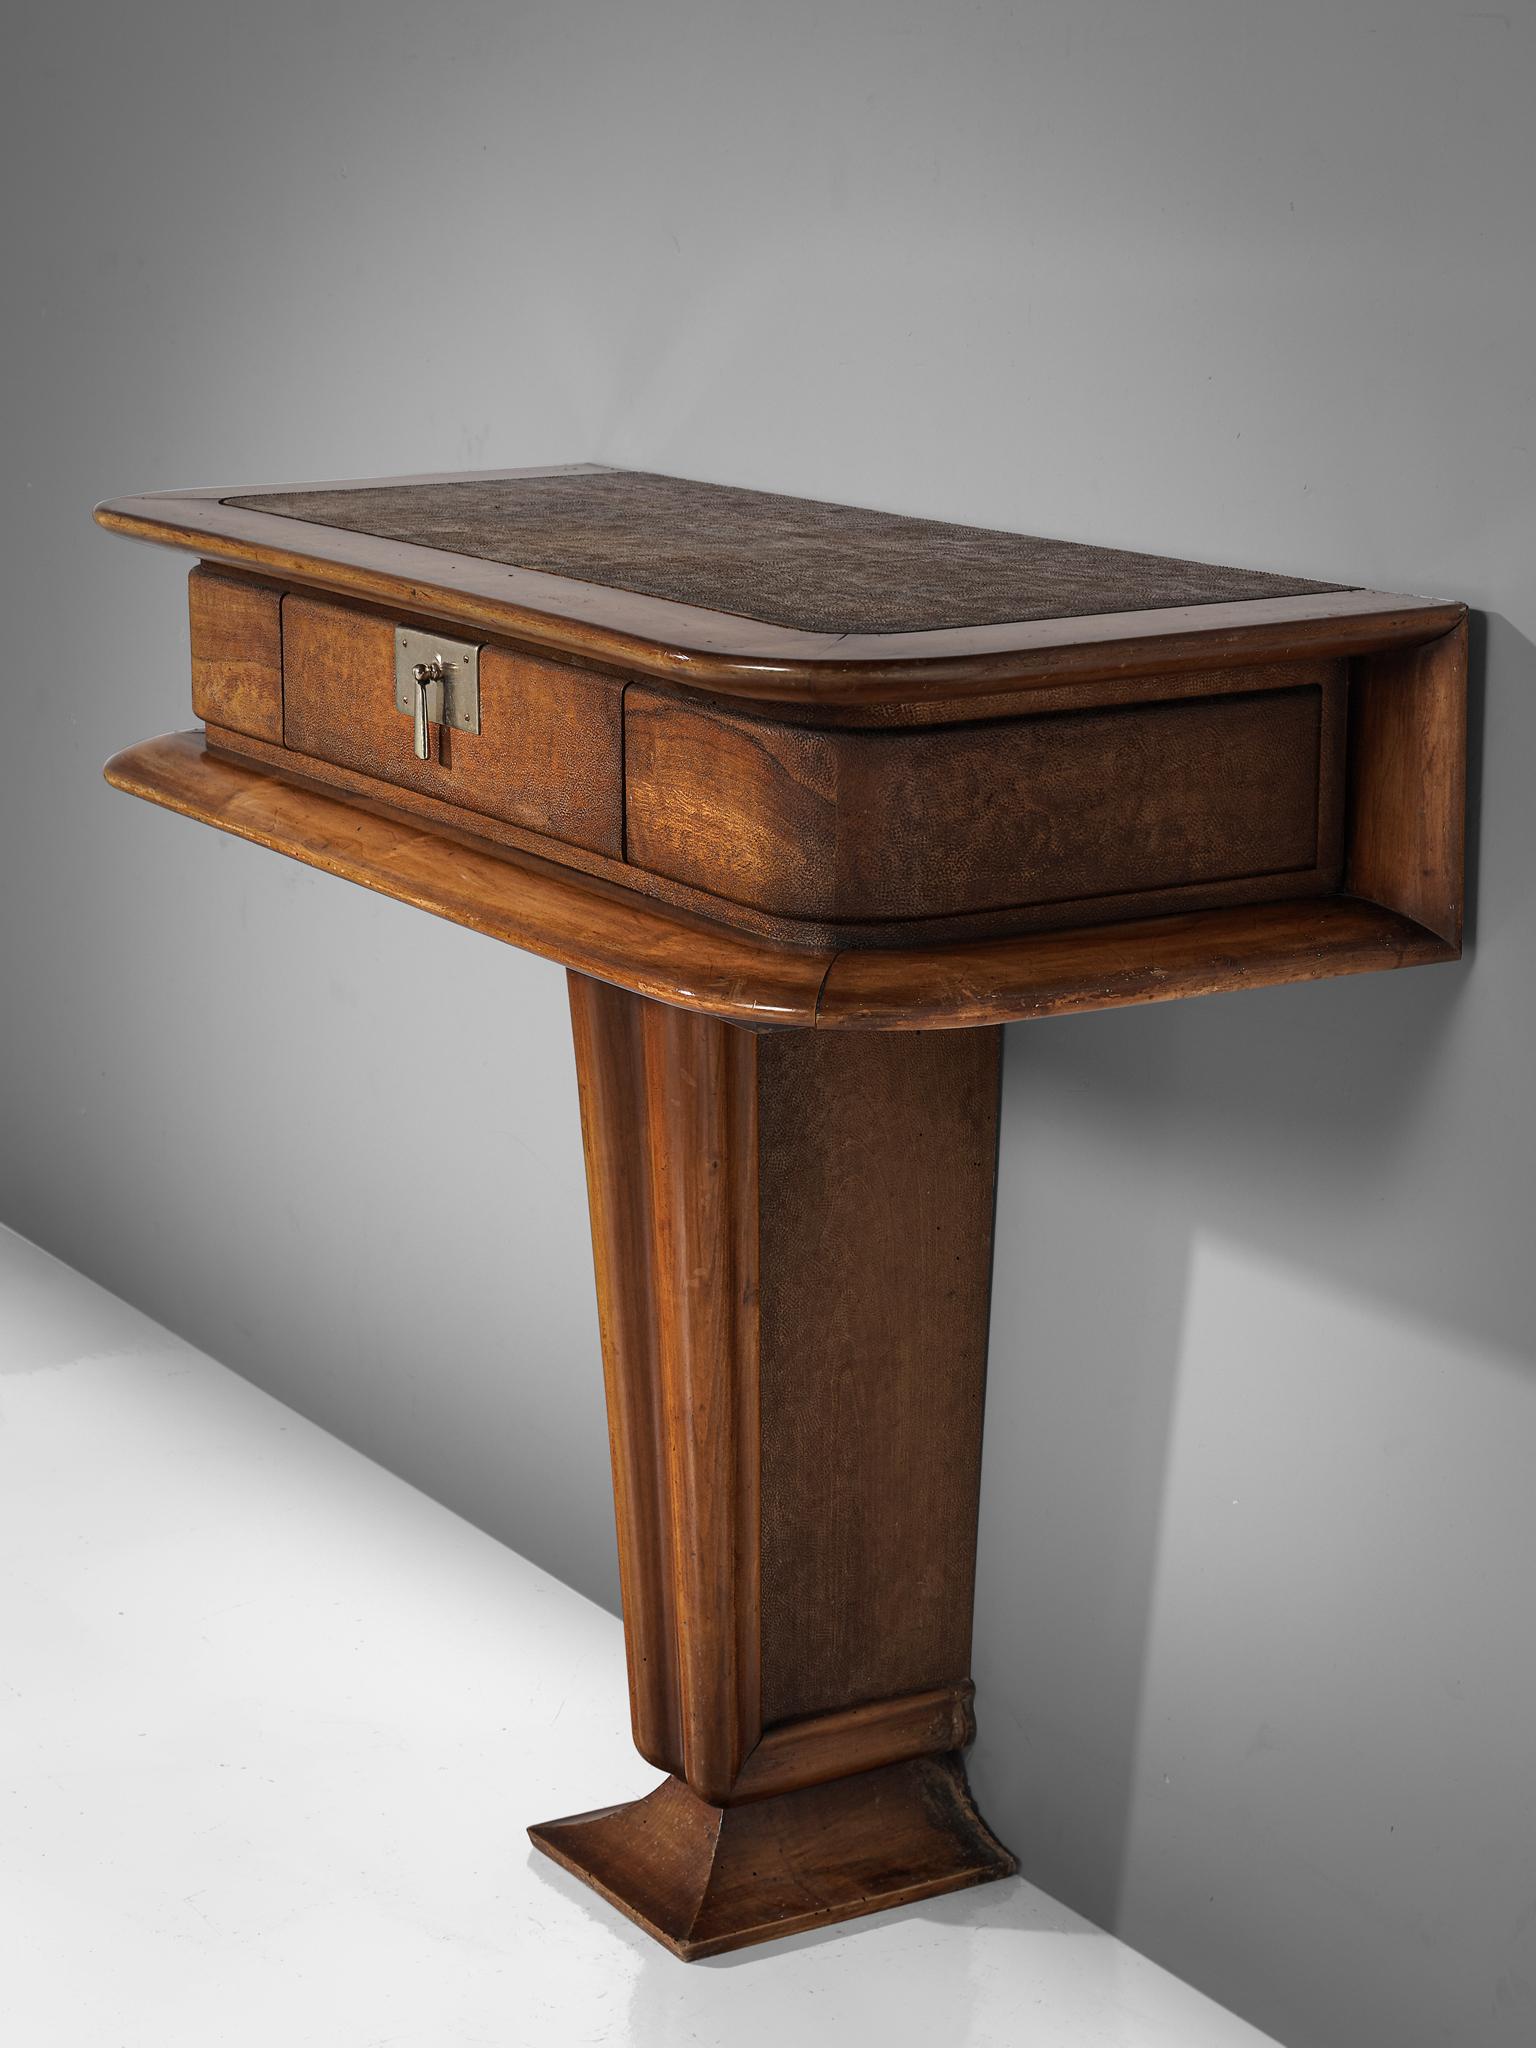 Italian Console Inlayed with Leather by Vittorio Valabrega